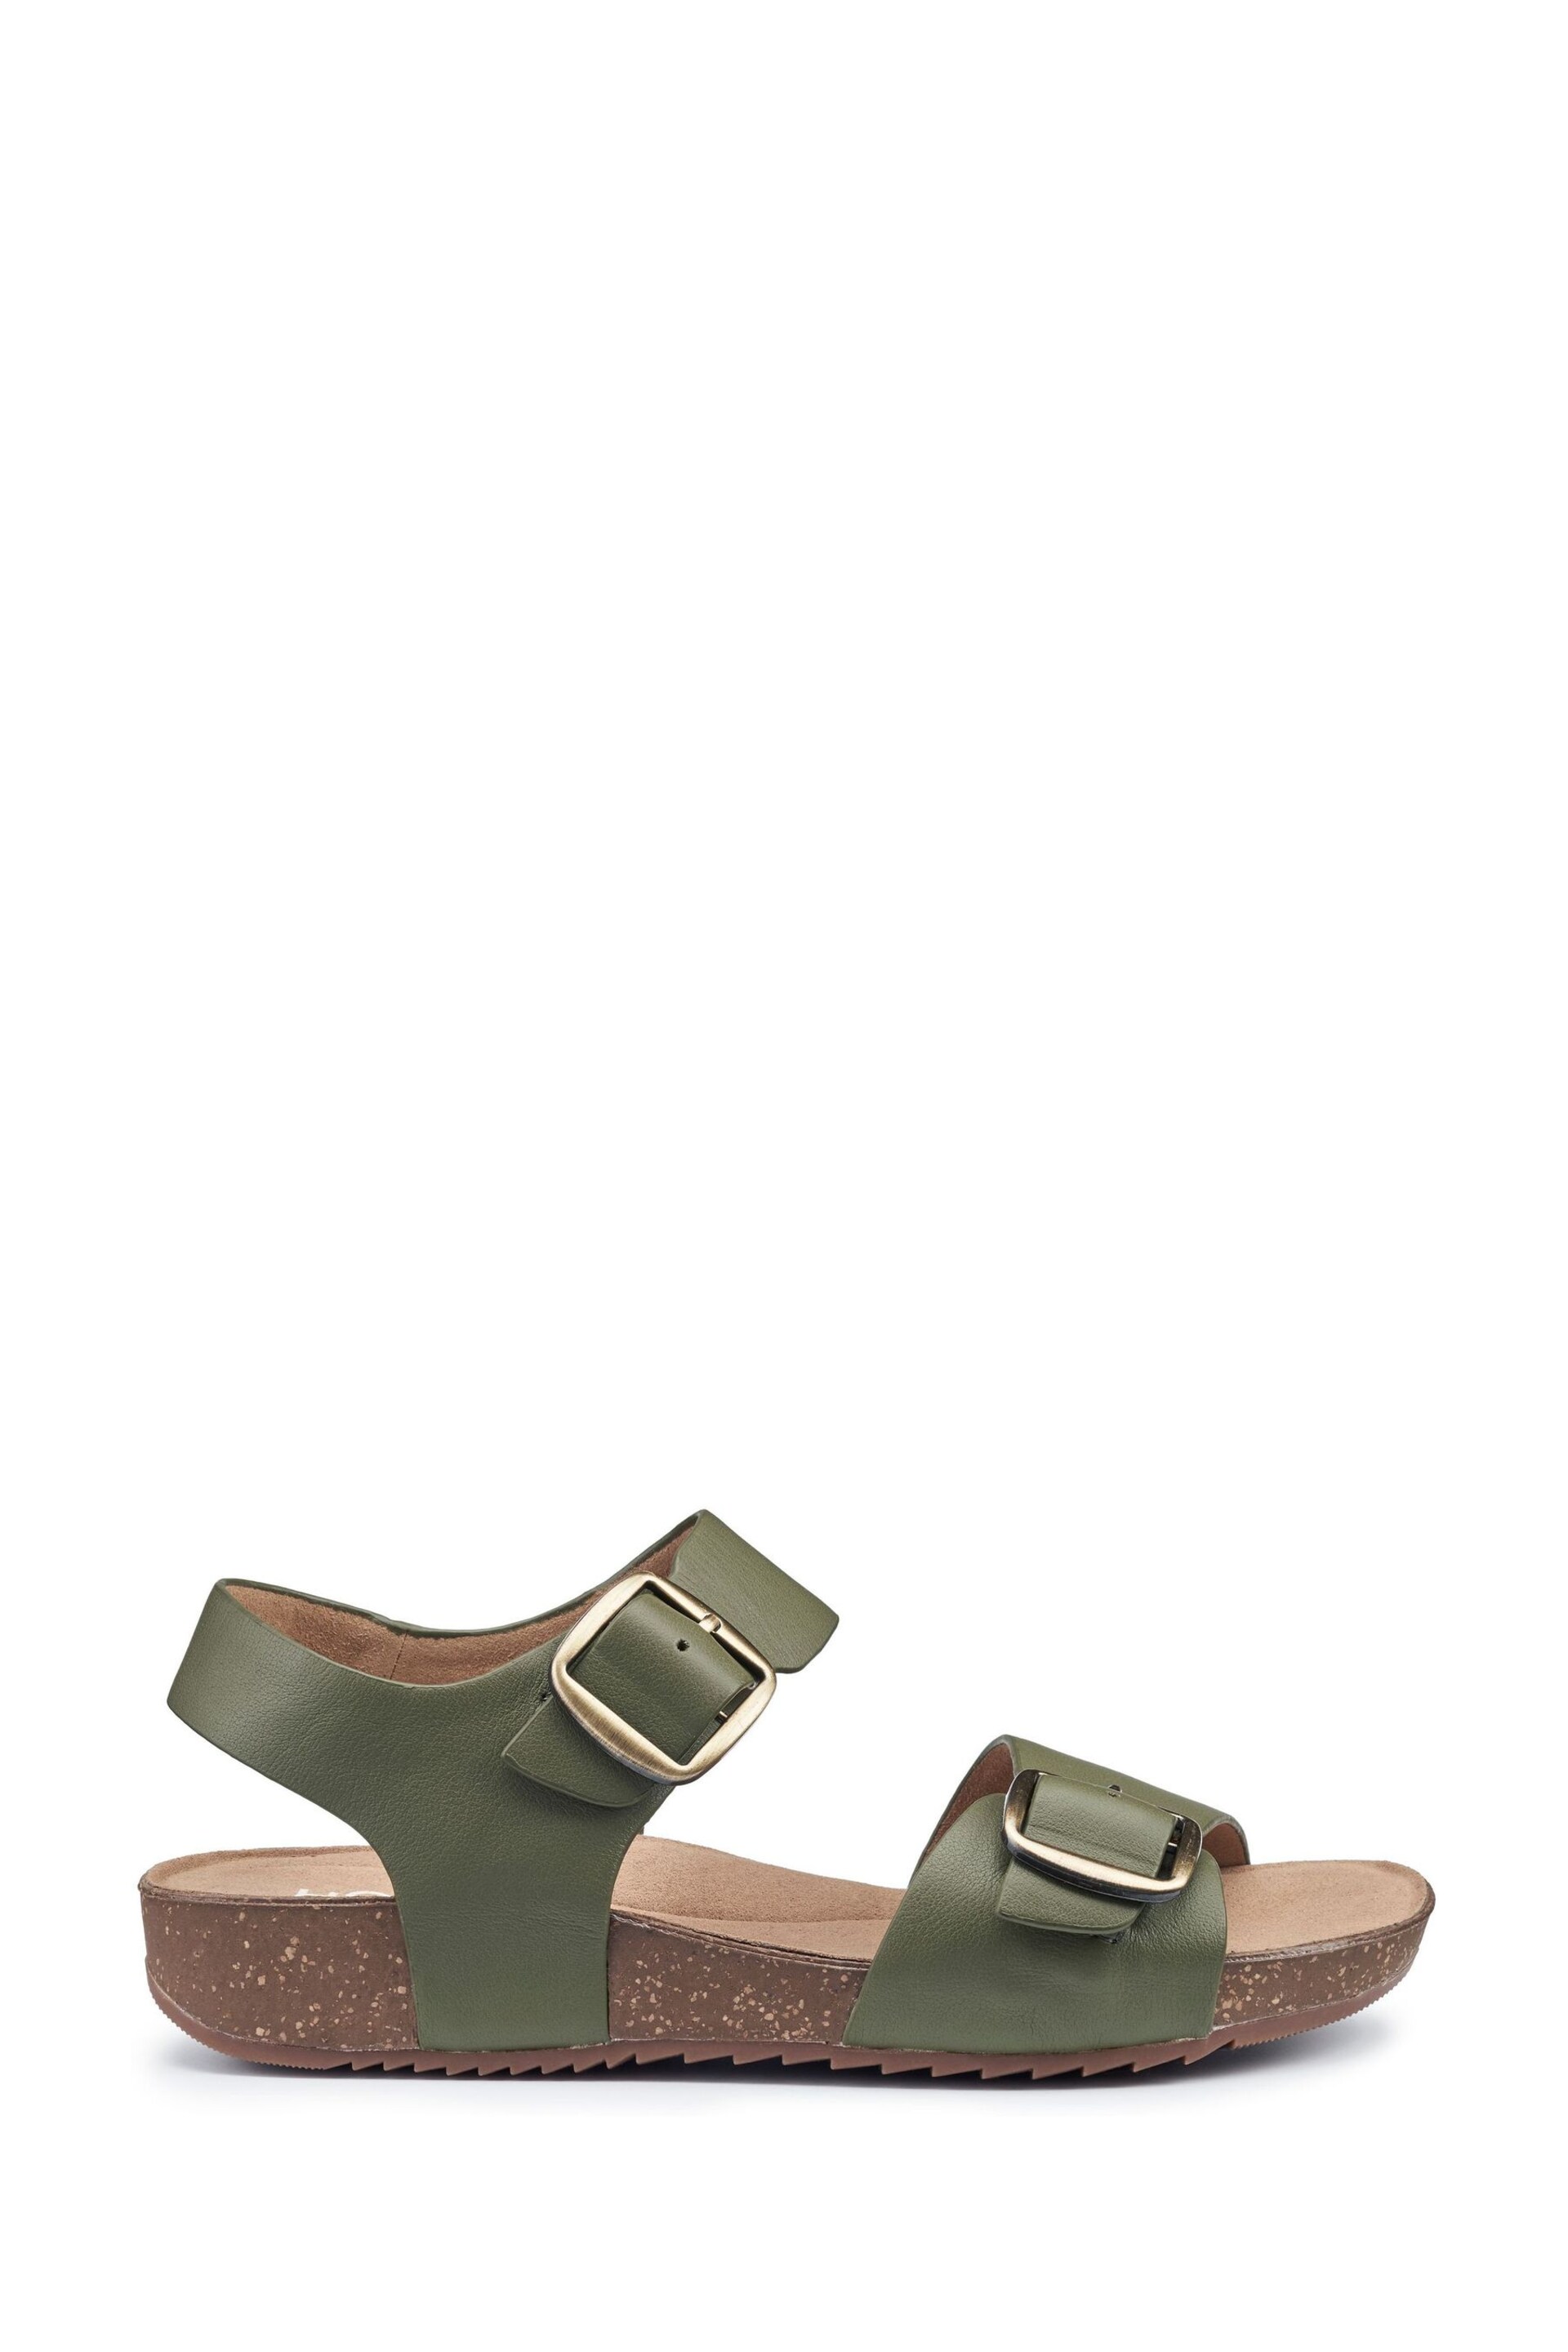 Hotter Dark Green Tourist II Buckle Extra Wide Fit Sandals - Image 1 of 4